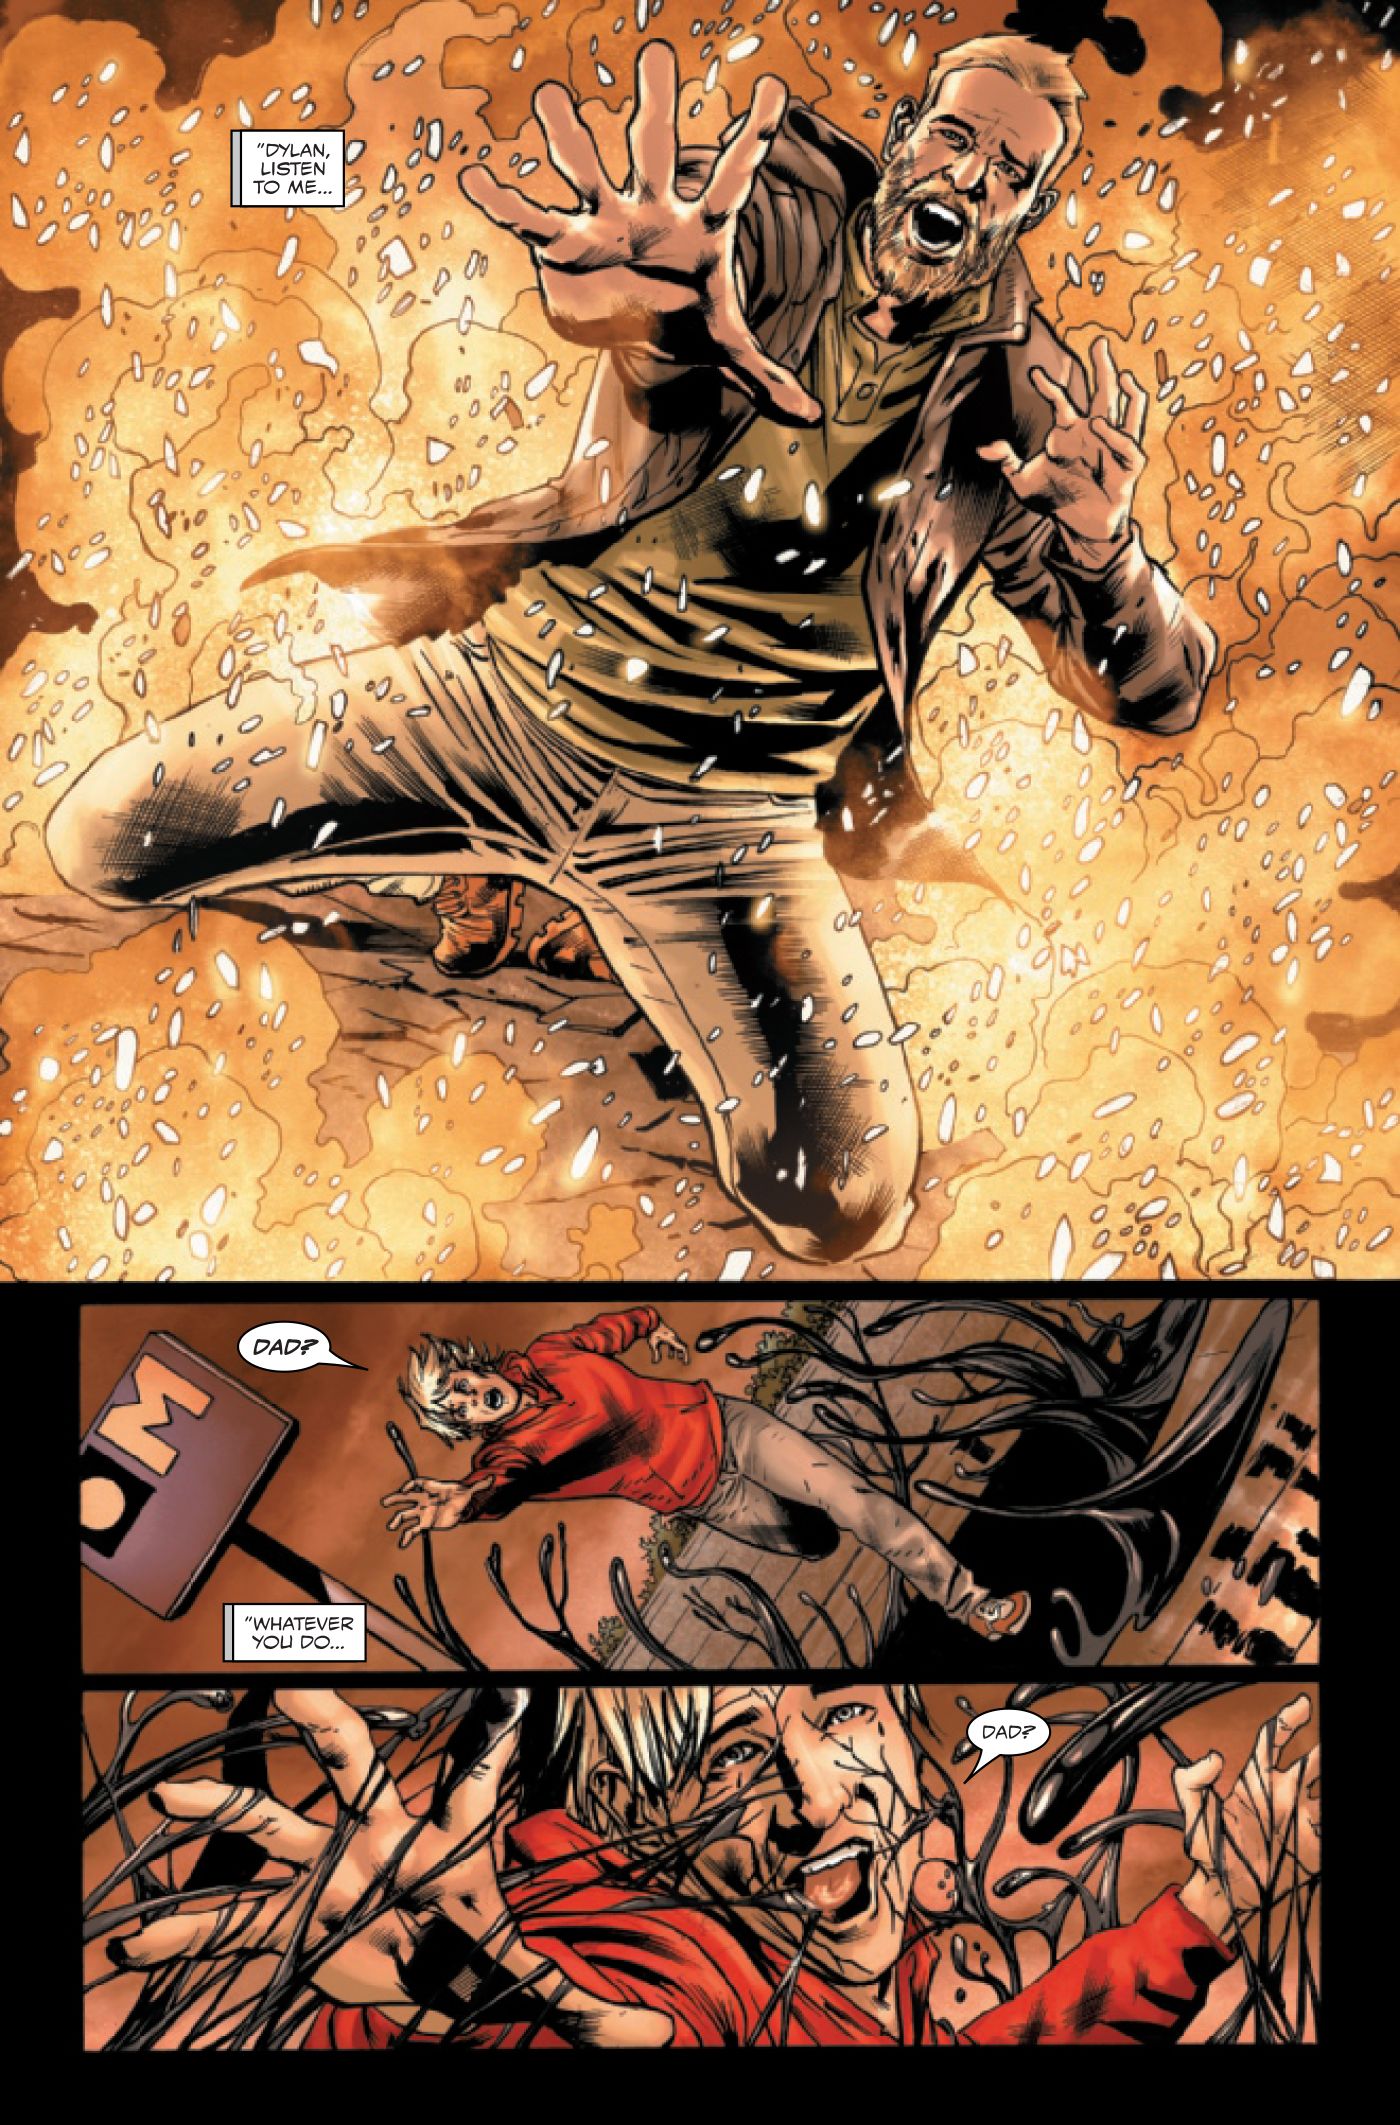 A flashback features the explosion that seemingly killed Eddie Brock and bonded Dylan to the symbiote.